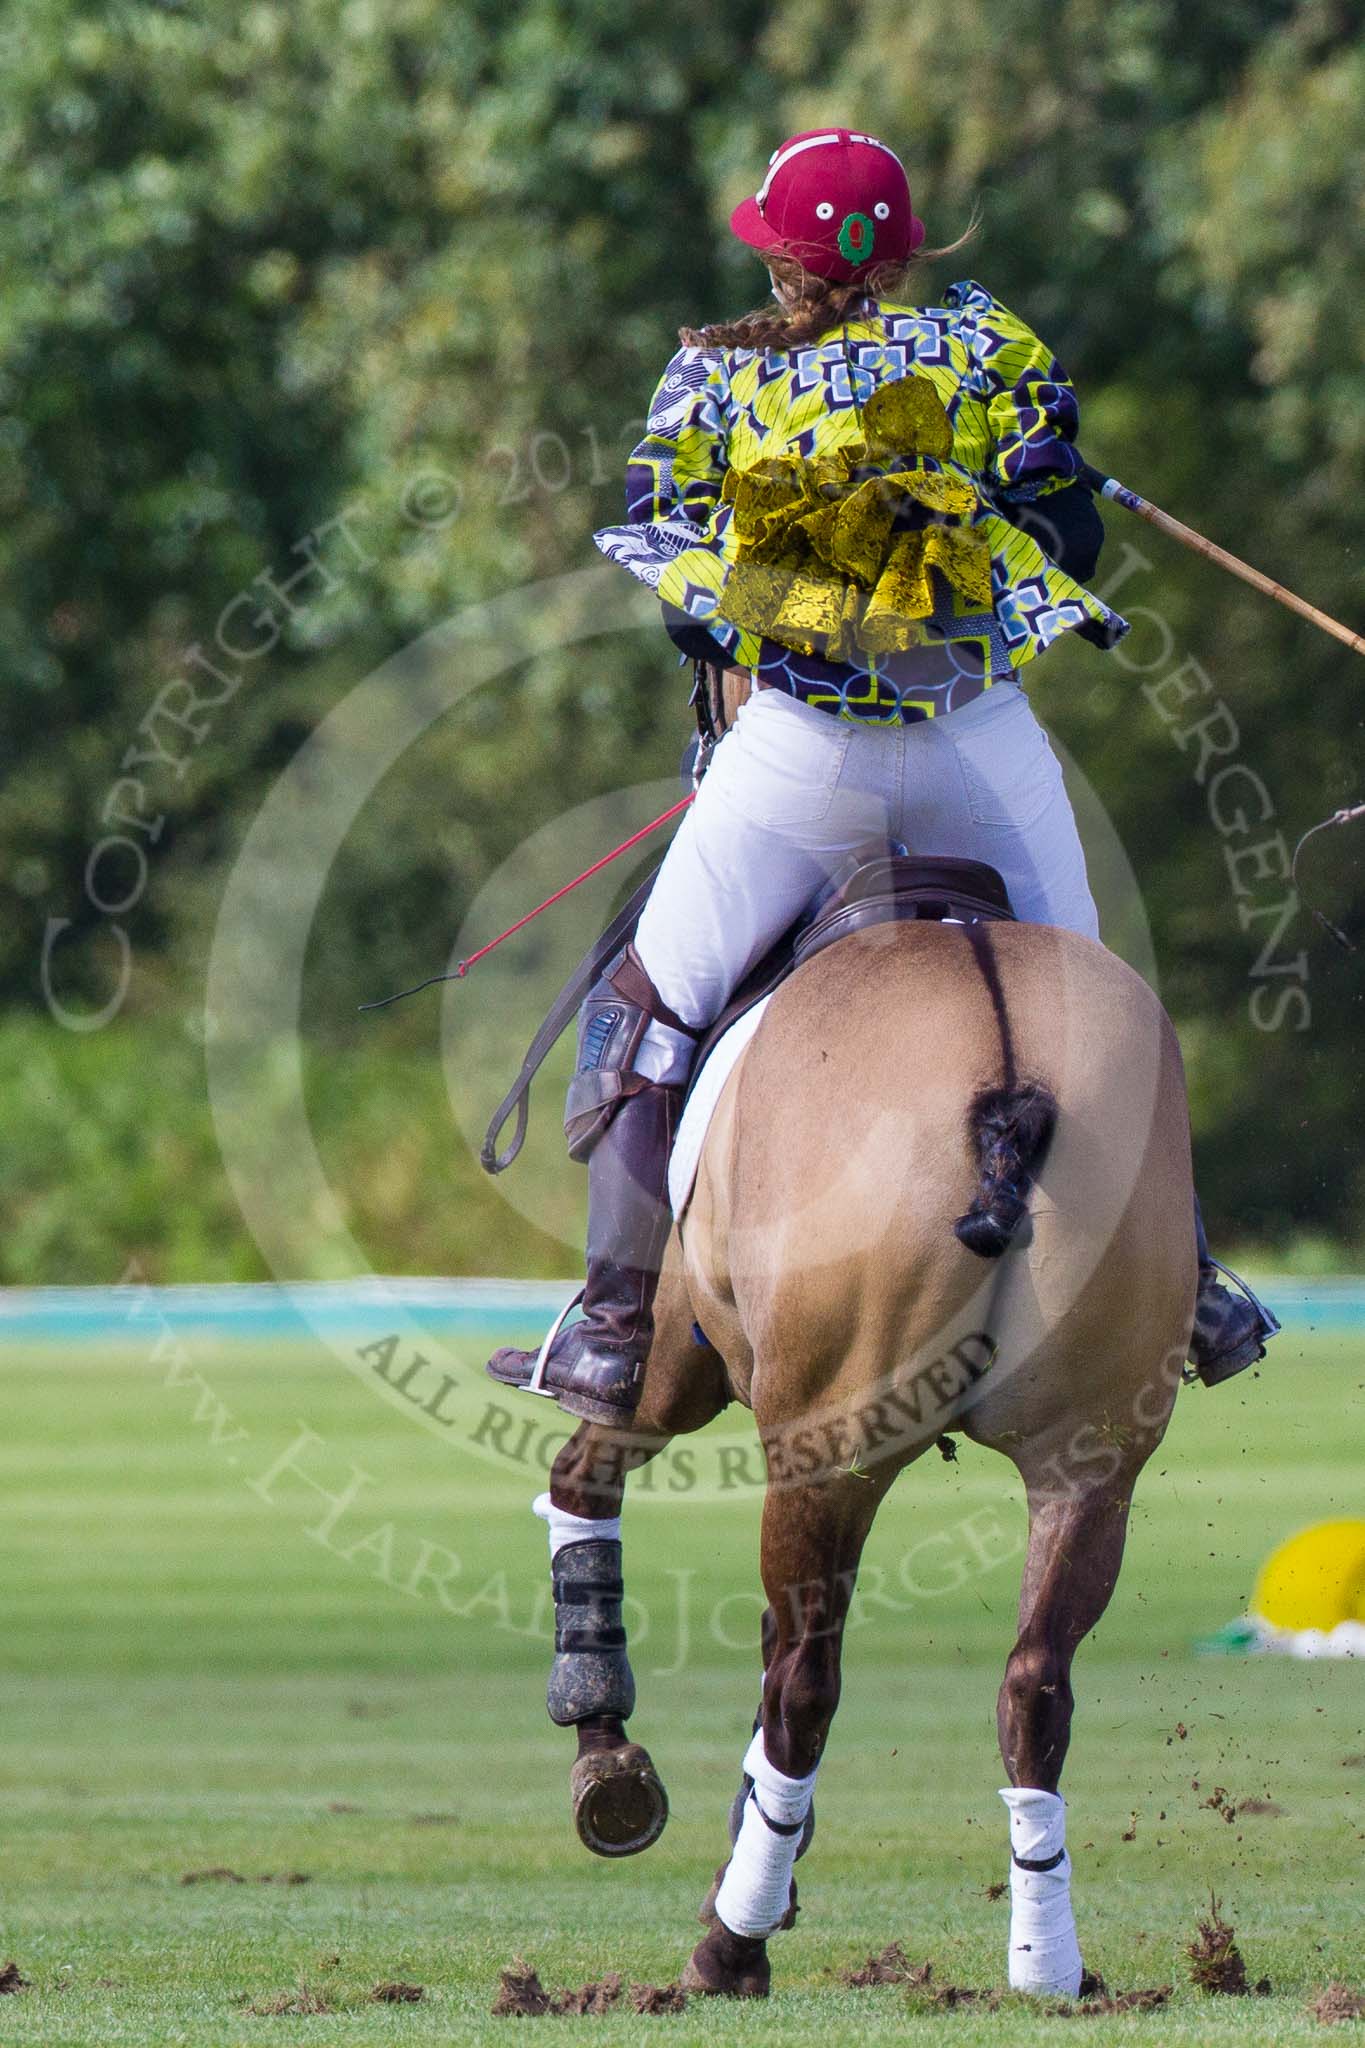 7th Heritage Polo Cup finals: AMG PETROENERGY Polo Player Sophie Kyriazi from Kenia, wearing a unique top of Nigerian Fashion Designer DNZY..
Hurtwood Park Polo Club,
Ewhurst Green,
Surrey,
United Kingdom,
on 05 August 2012 at 16:12, image #209